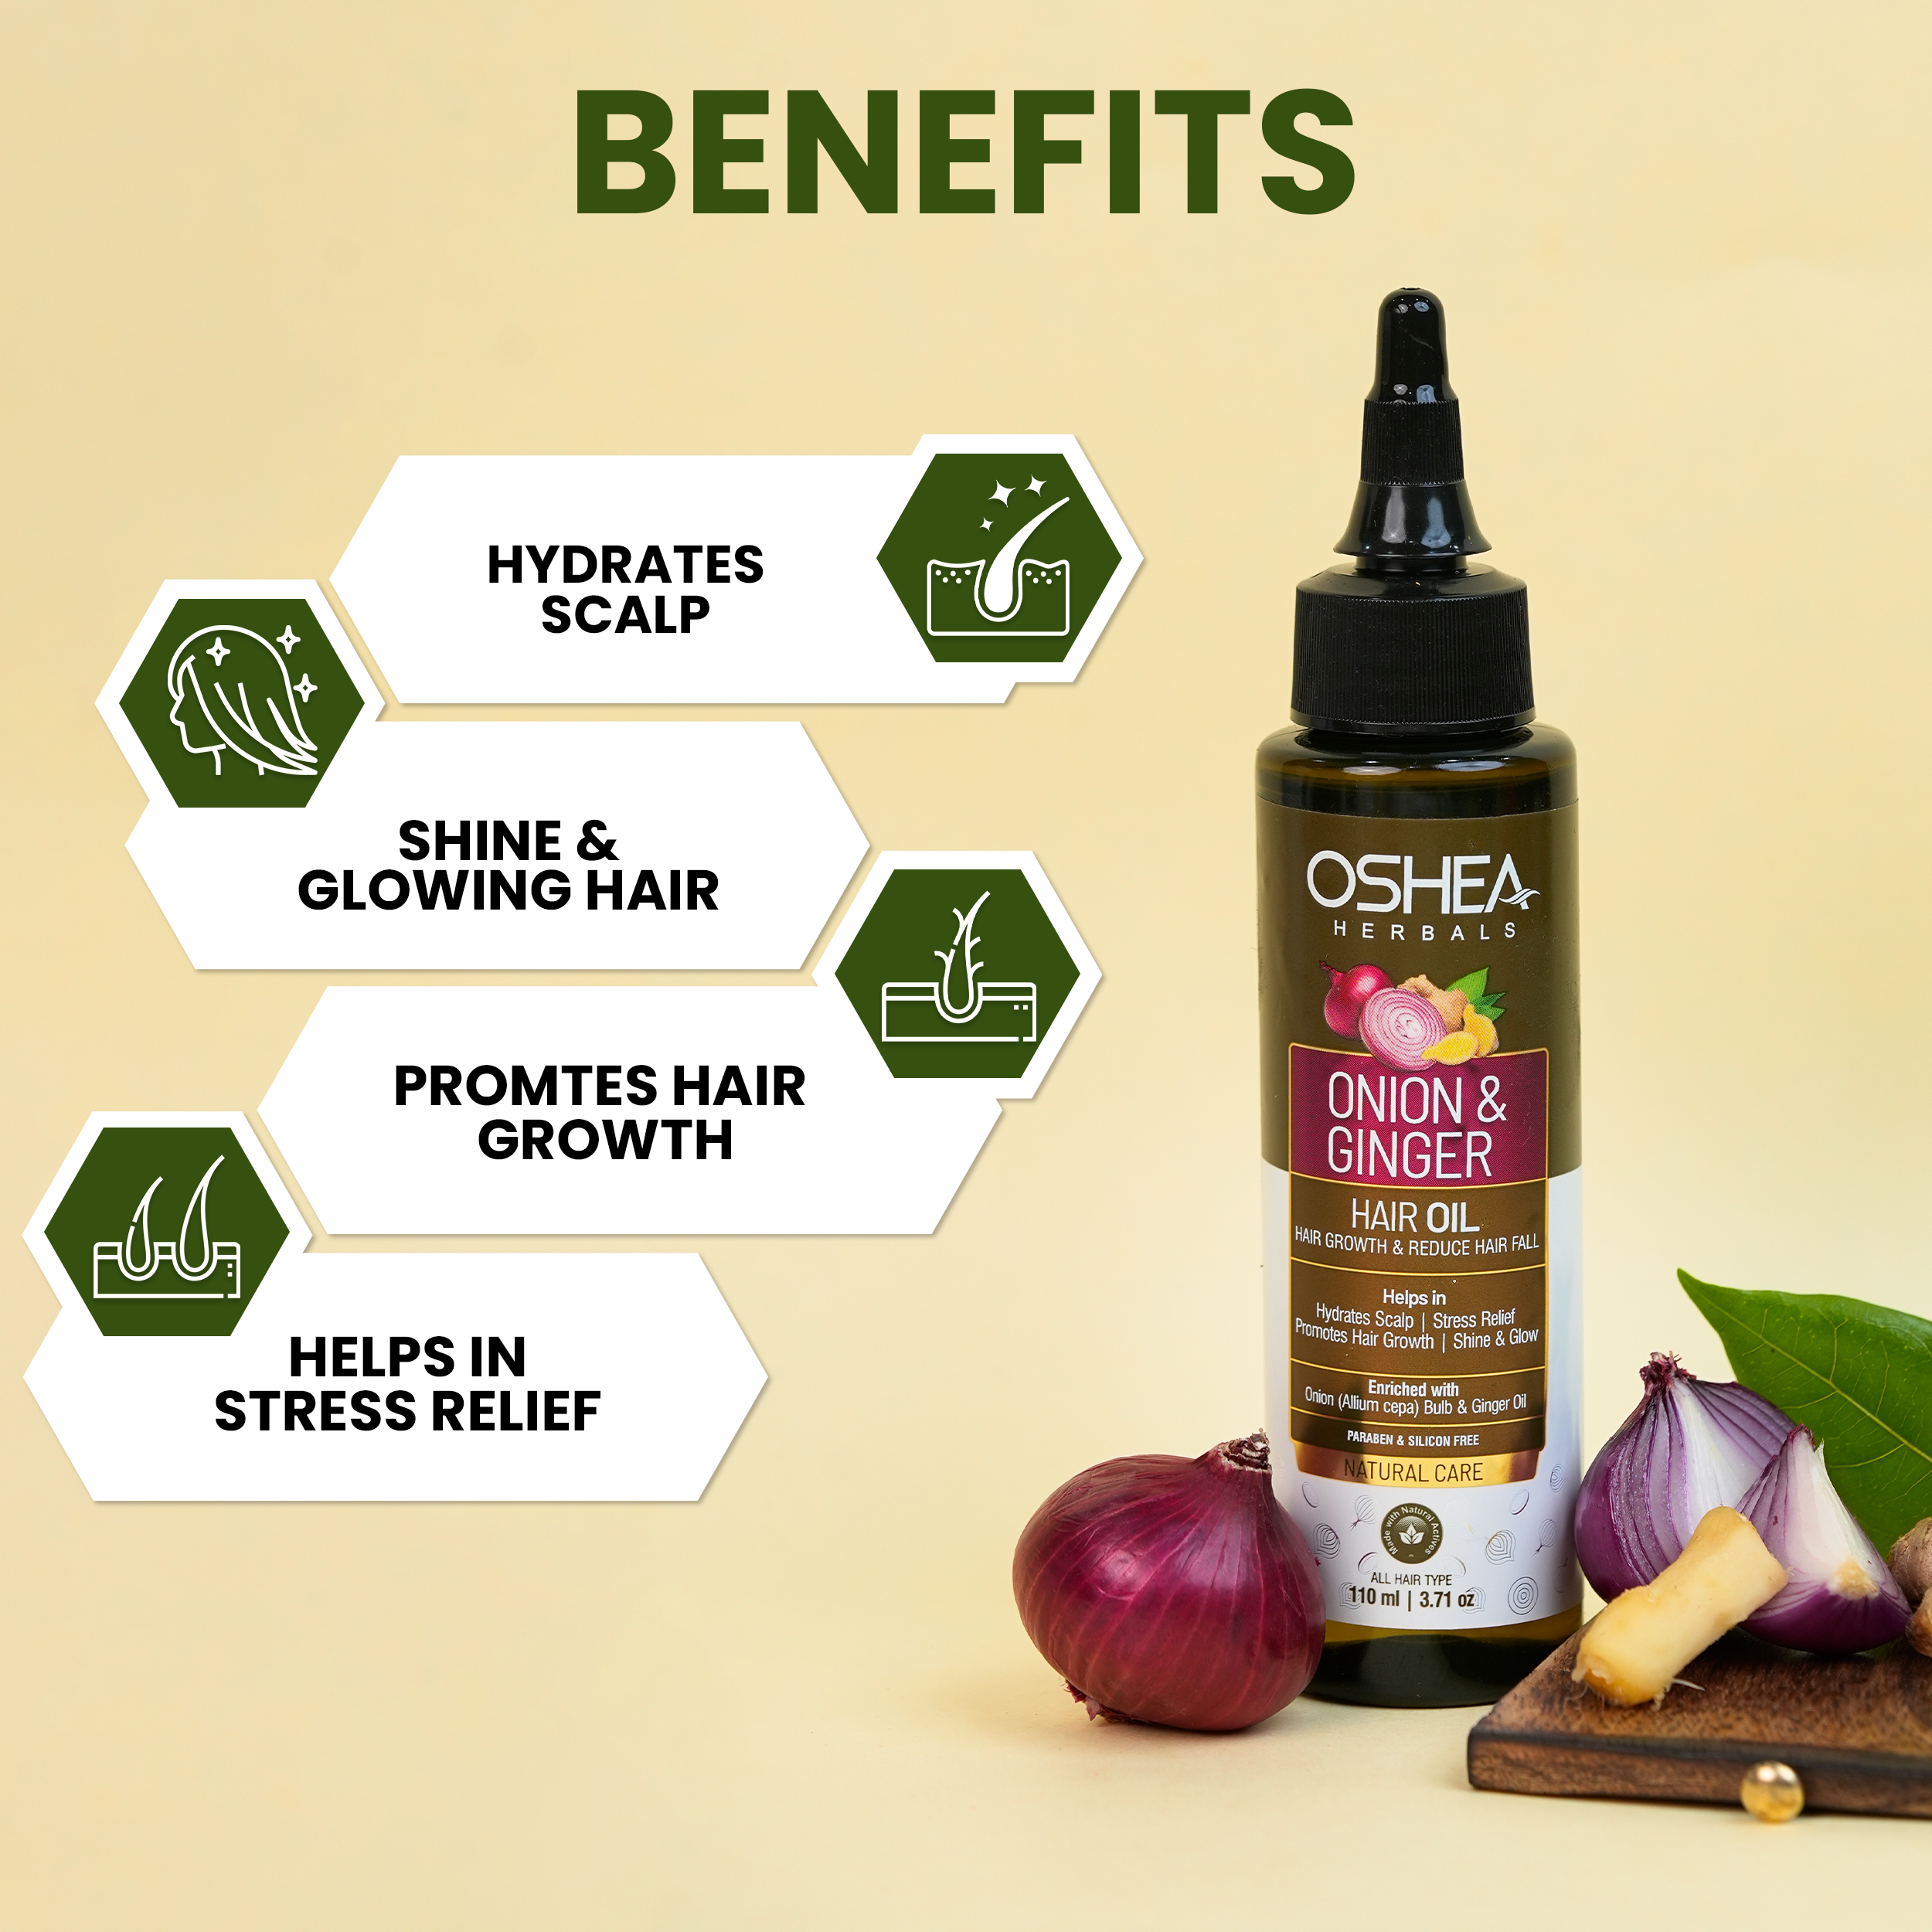 Benefits Onion And Ginger Hair Oil Oshea Herbals